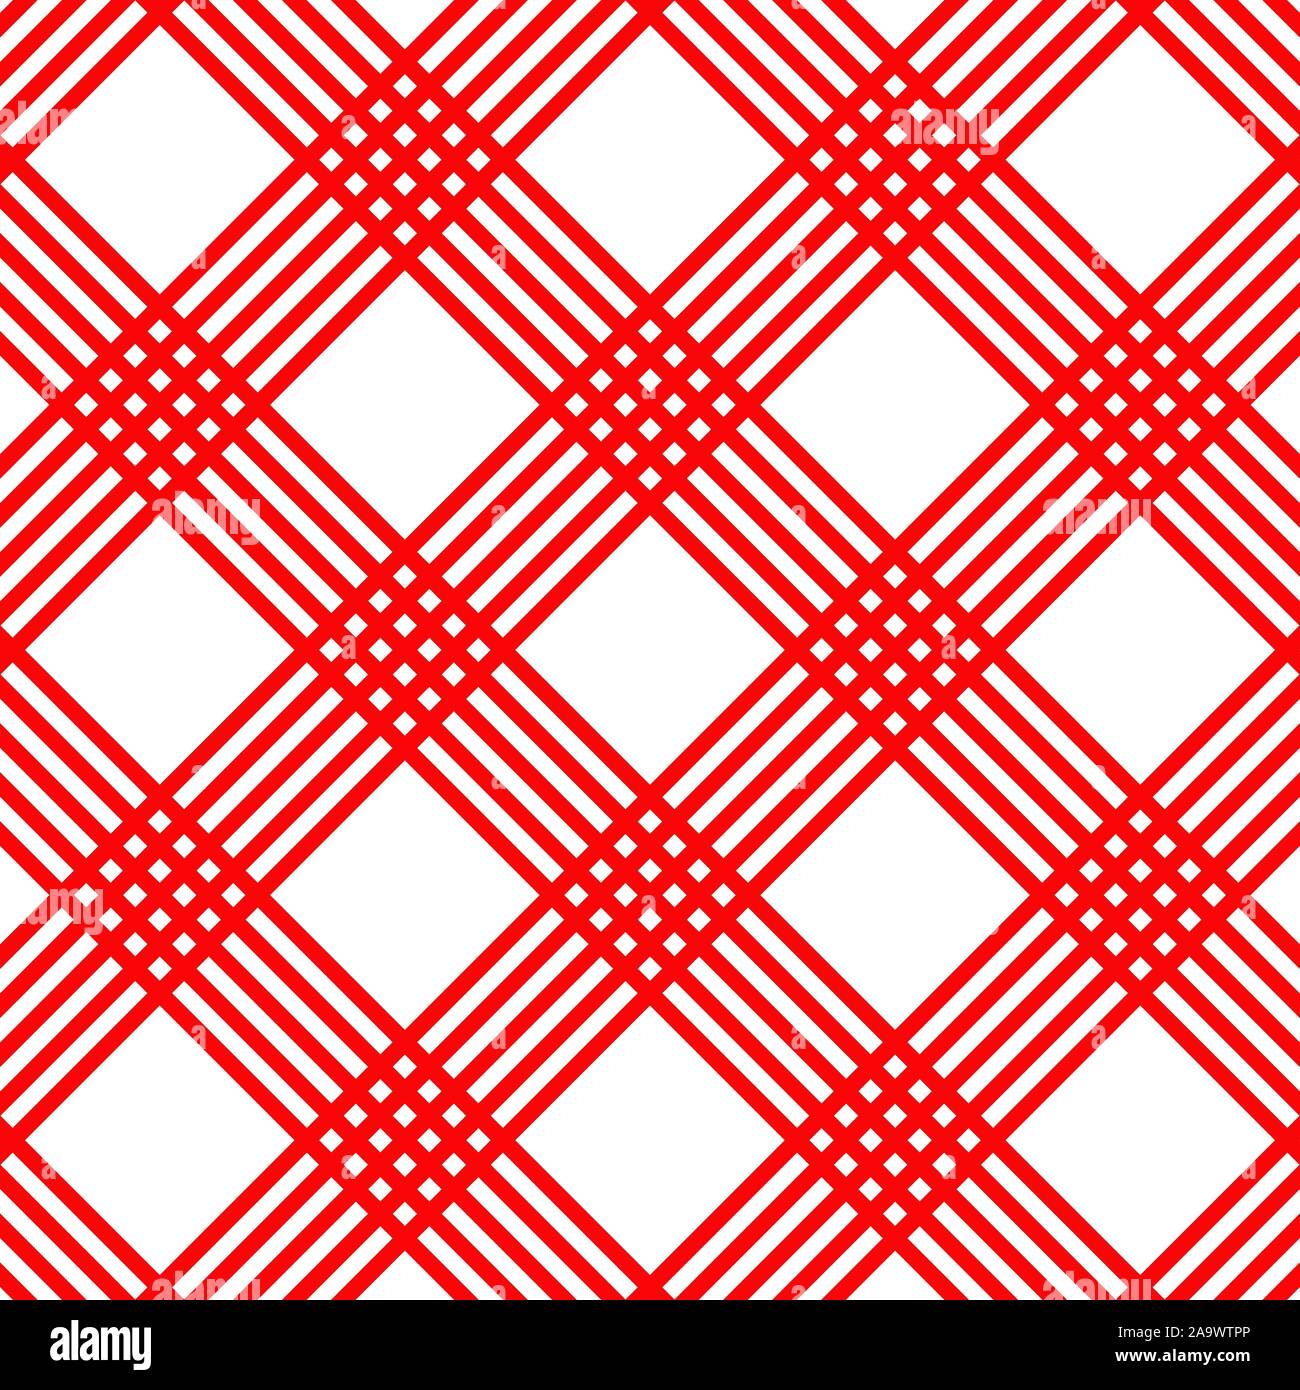 Red check seamless pattern. Texture for plaid, tablecloths, clothes, shirts, dresses, paper, bedding, blankets, quilts and other textile products. Vec Stock Vector